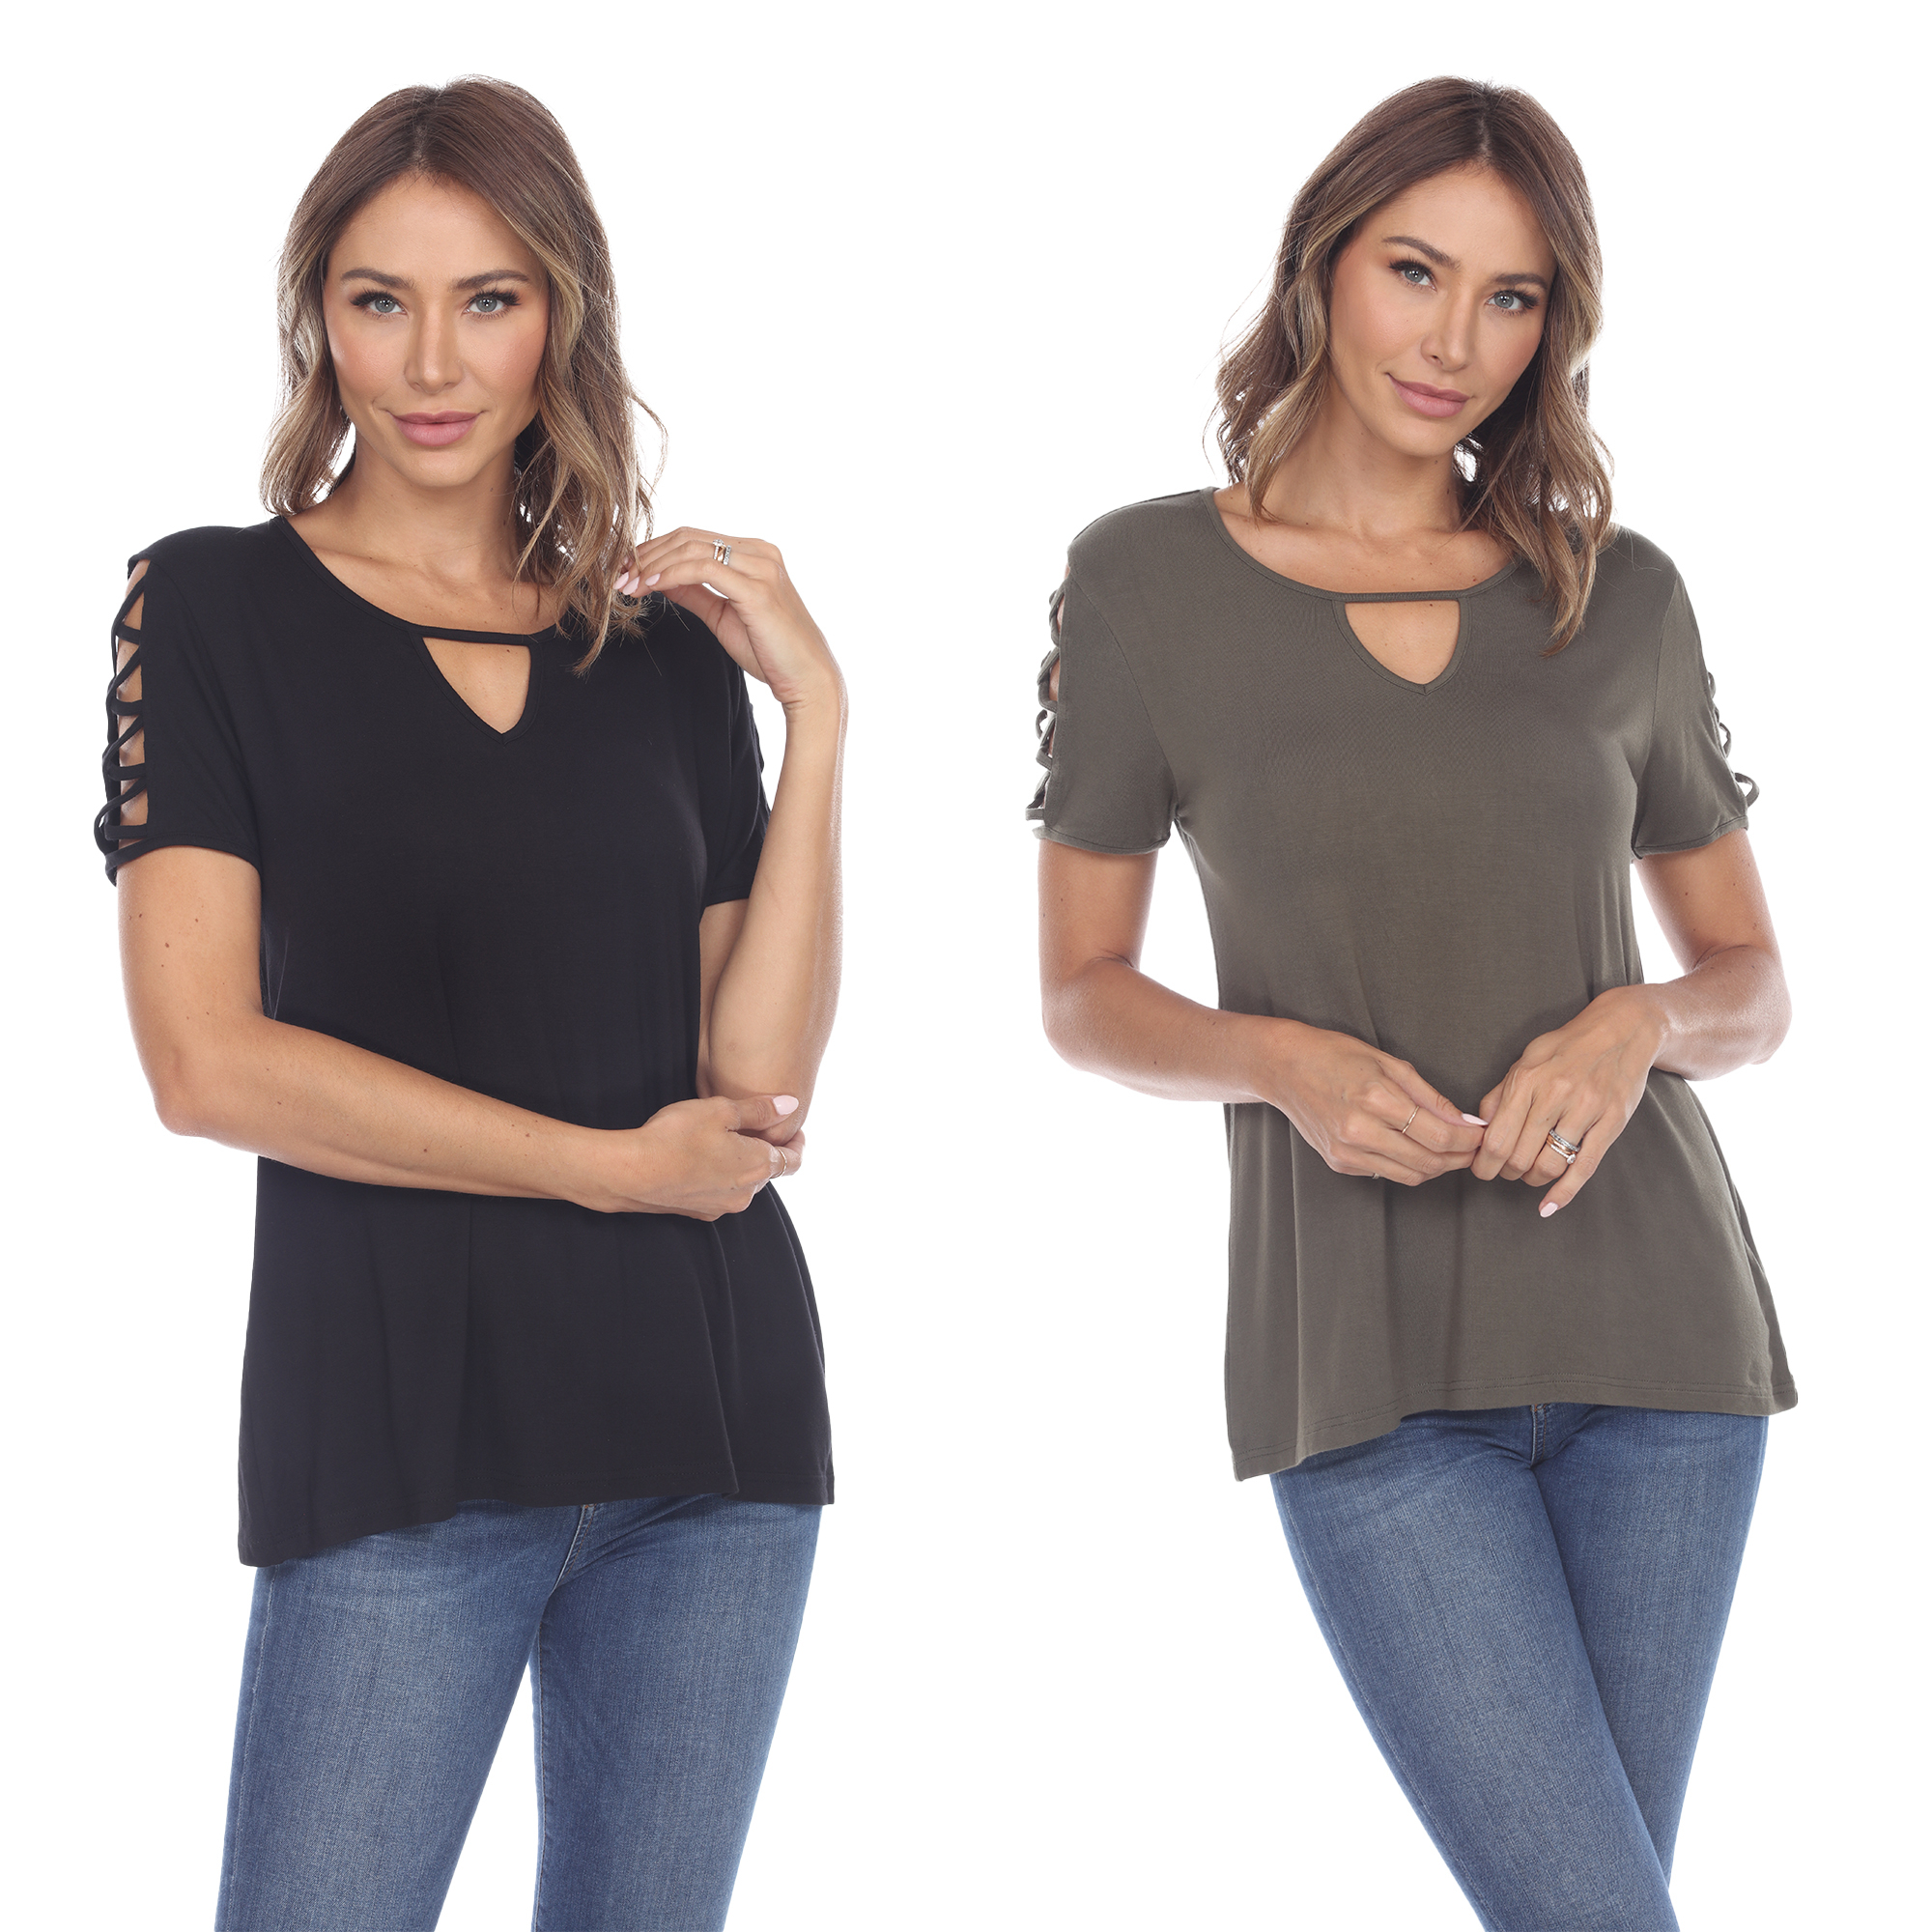 White Mark Women's Pack Of 2 Keyhole Neck Short Sleeve Top - Black Yellow, Small